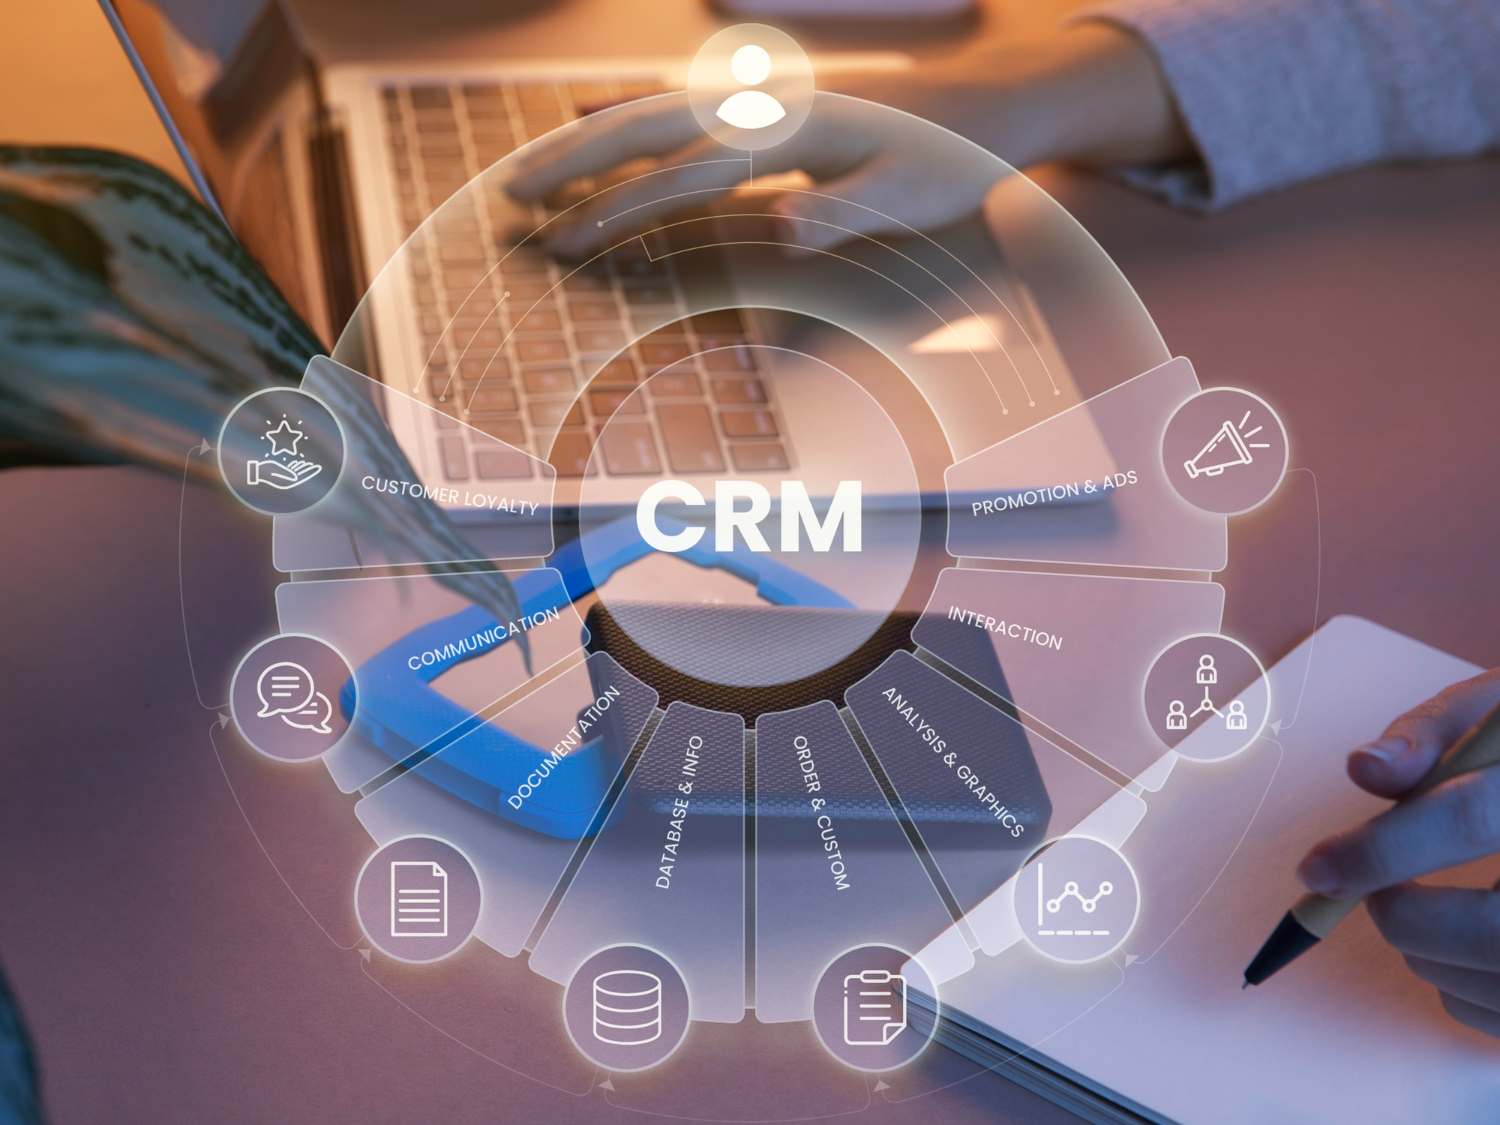 Field Service Business with Service CRM Software